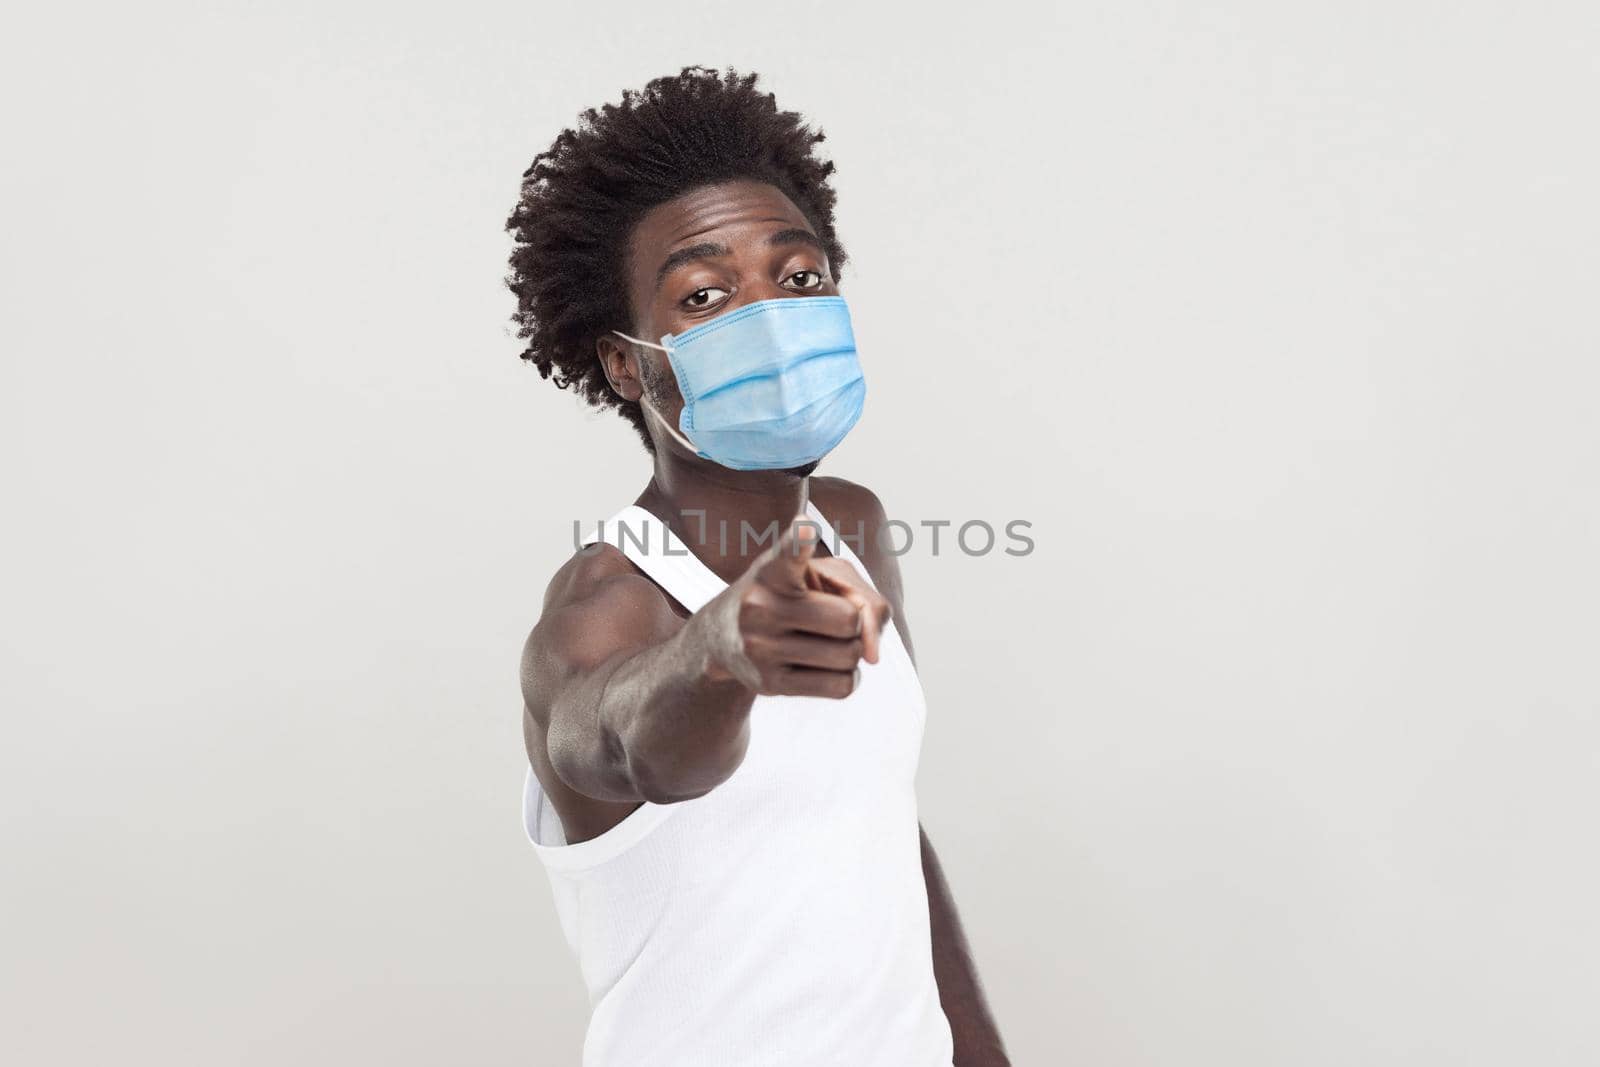 Hey you. Portrait of serious young man wearing white shirt with surgical medical mask standing looking and pointing at camera with serious face. indoor studio shot isolated on gray background.